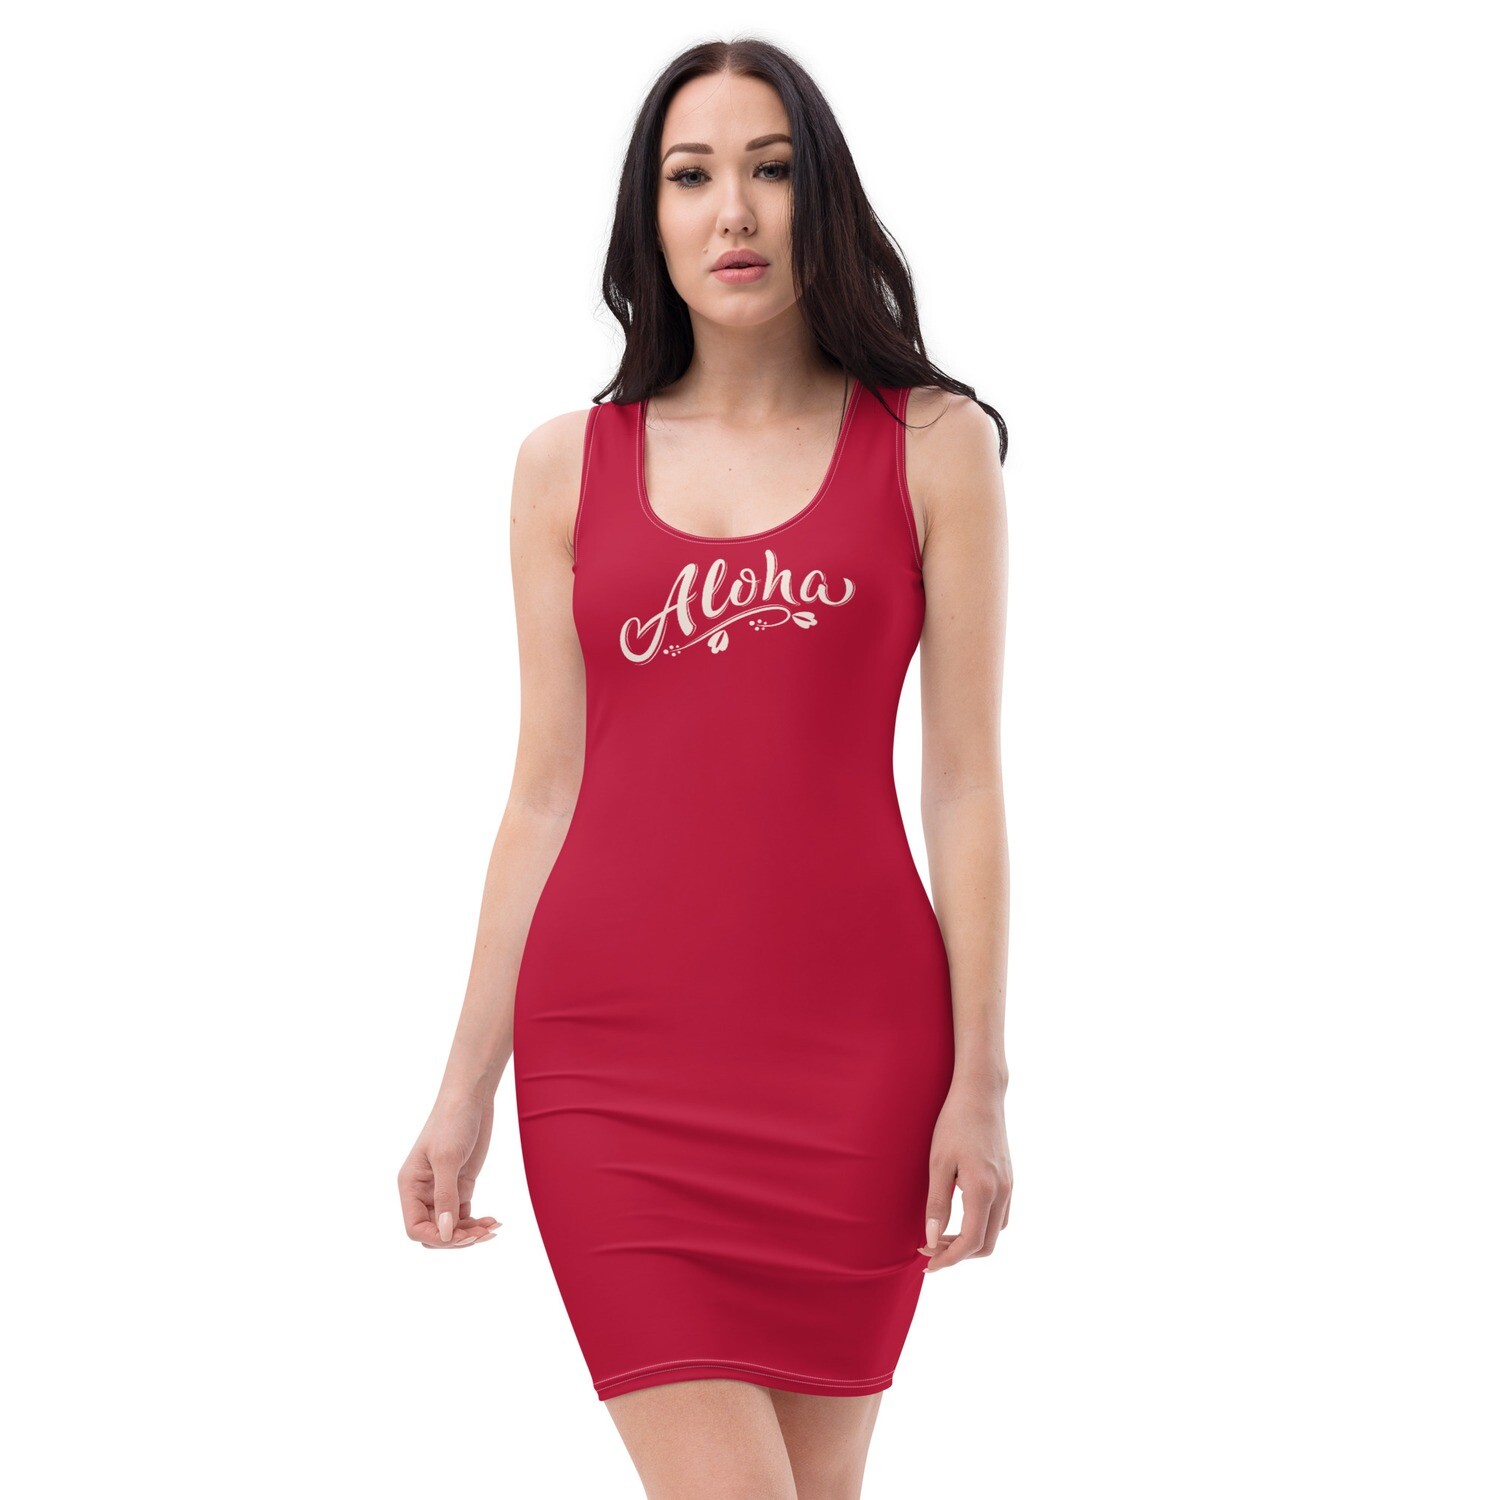 Hibiscus red bodycon dress with Hawaiian greeting in sizes XS-XL